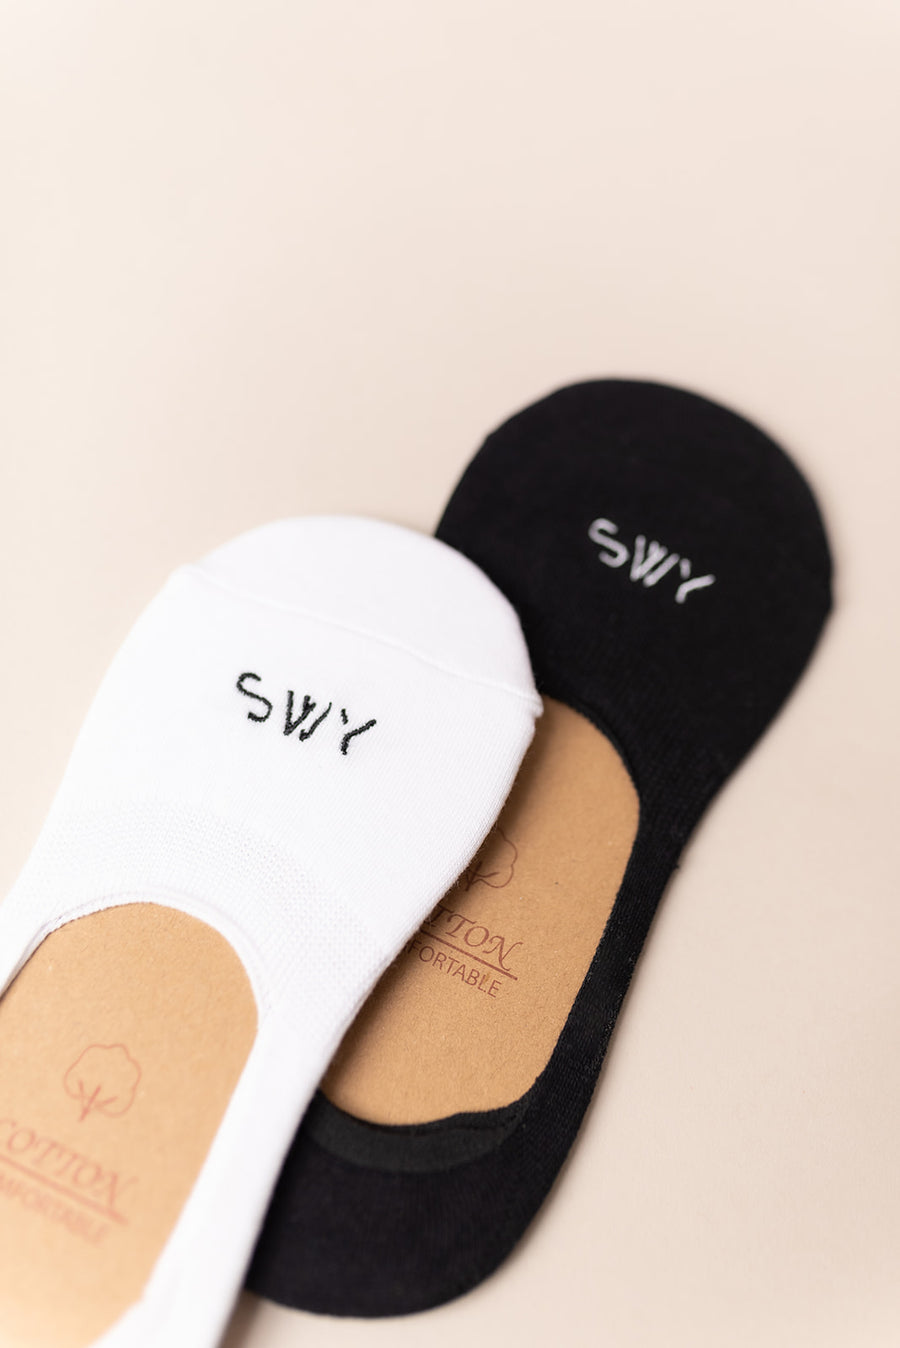 Swy low high quality socks in black and white 